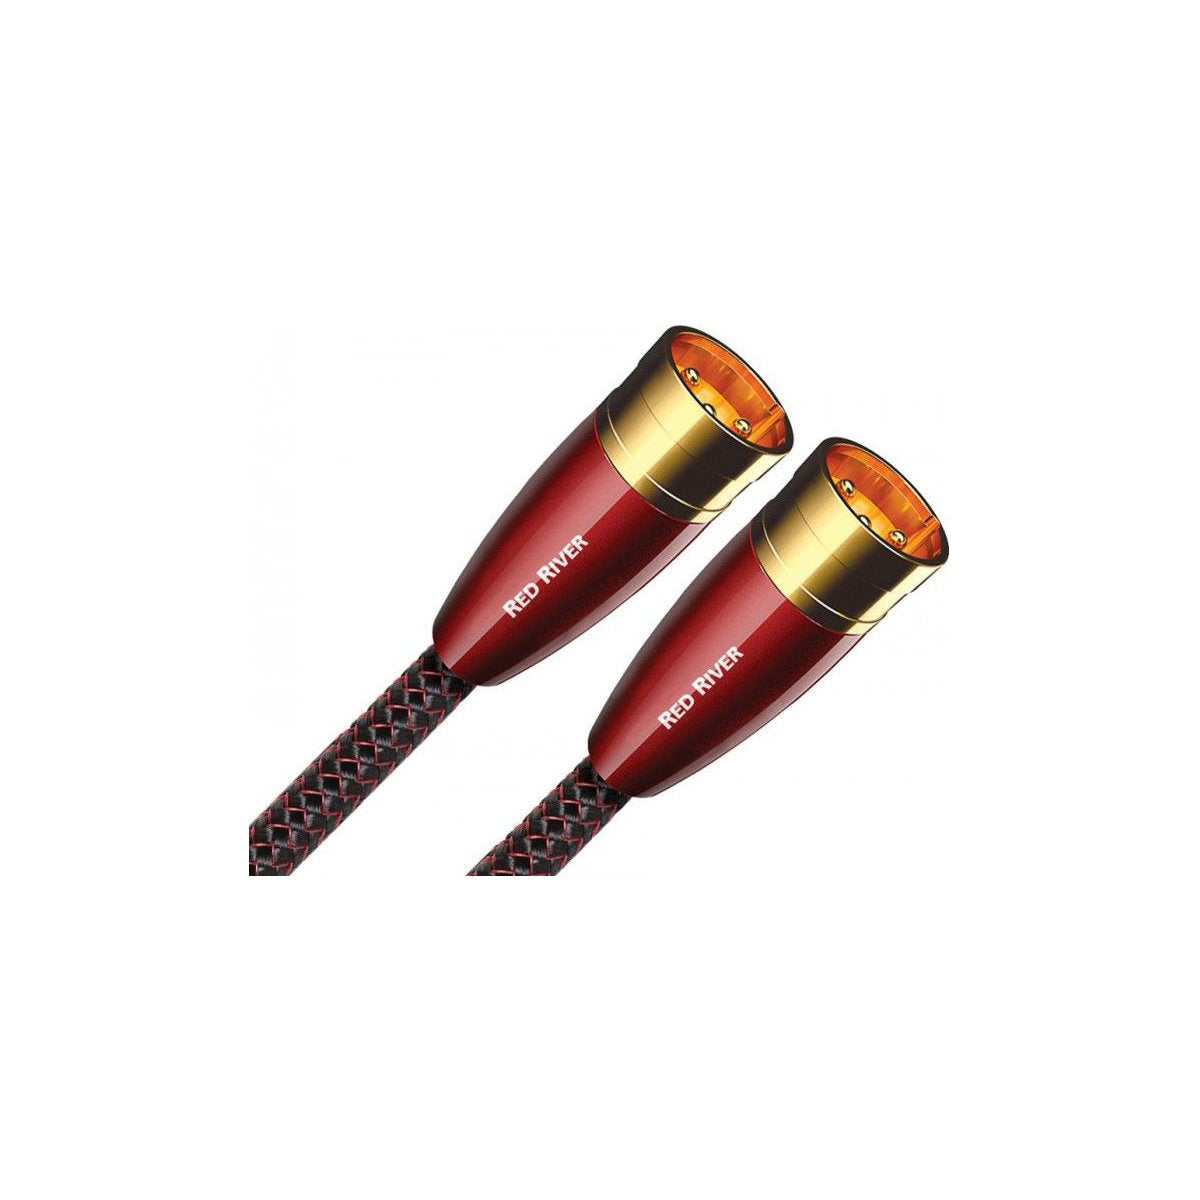 Audioquest RCA XLR Cables - RED RIVER - The Audio Experts